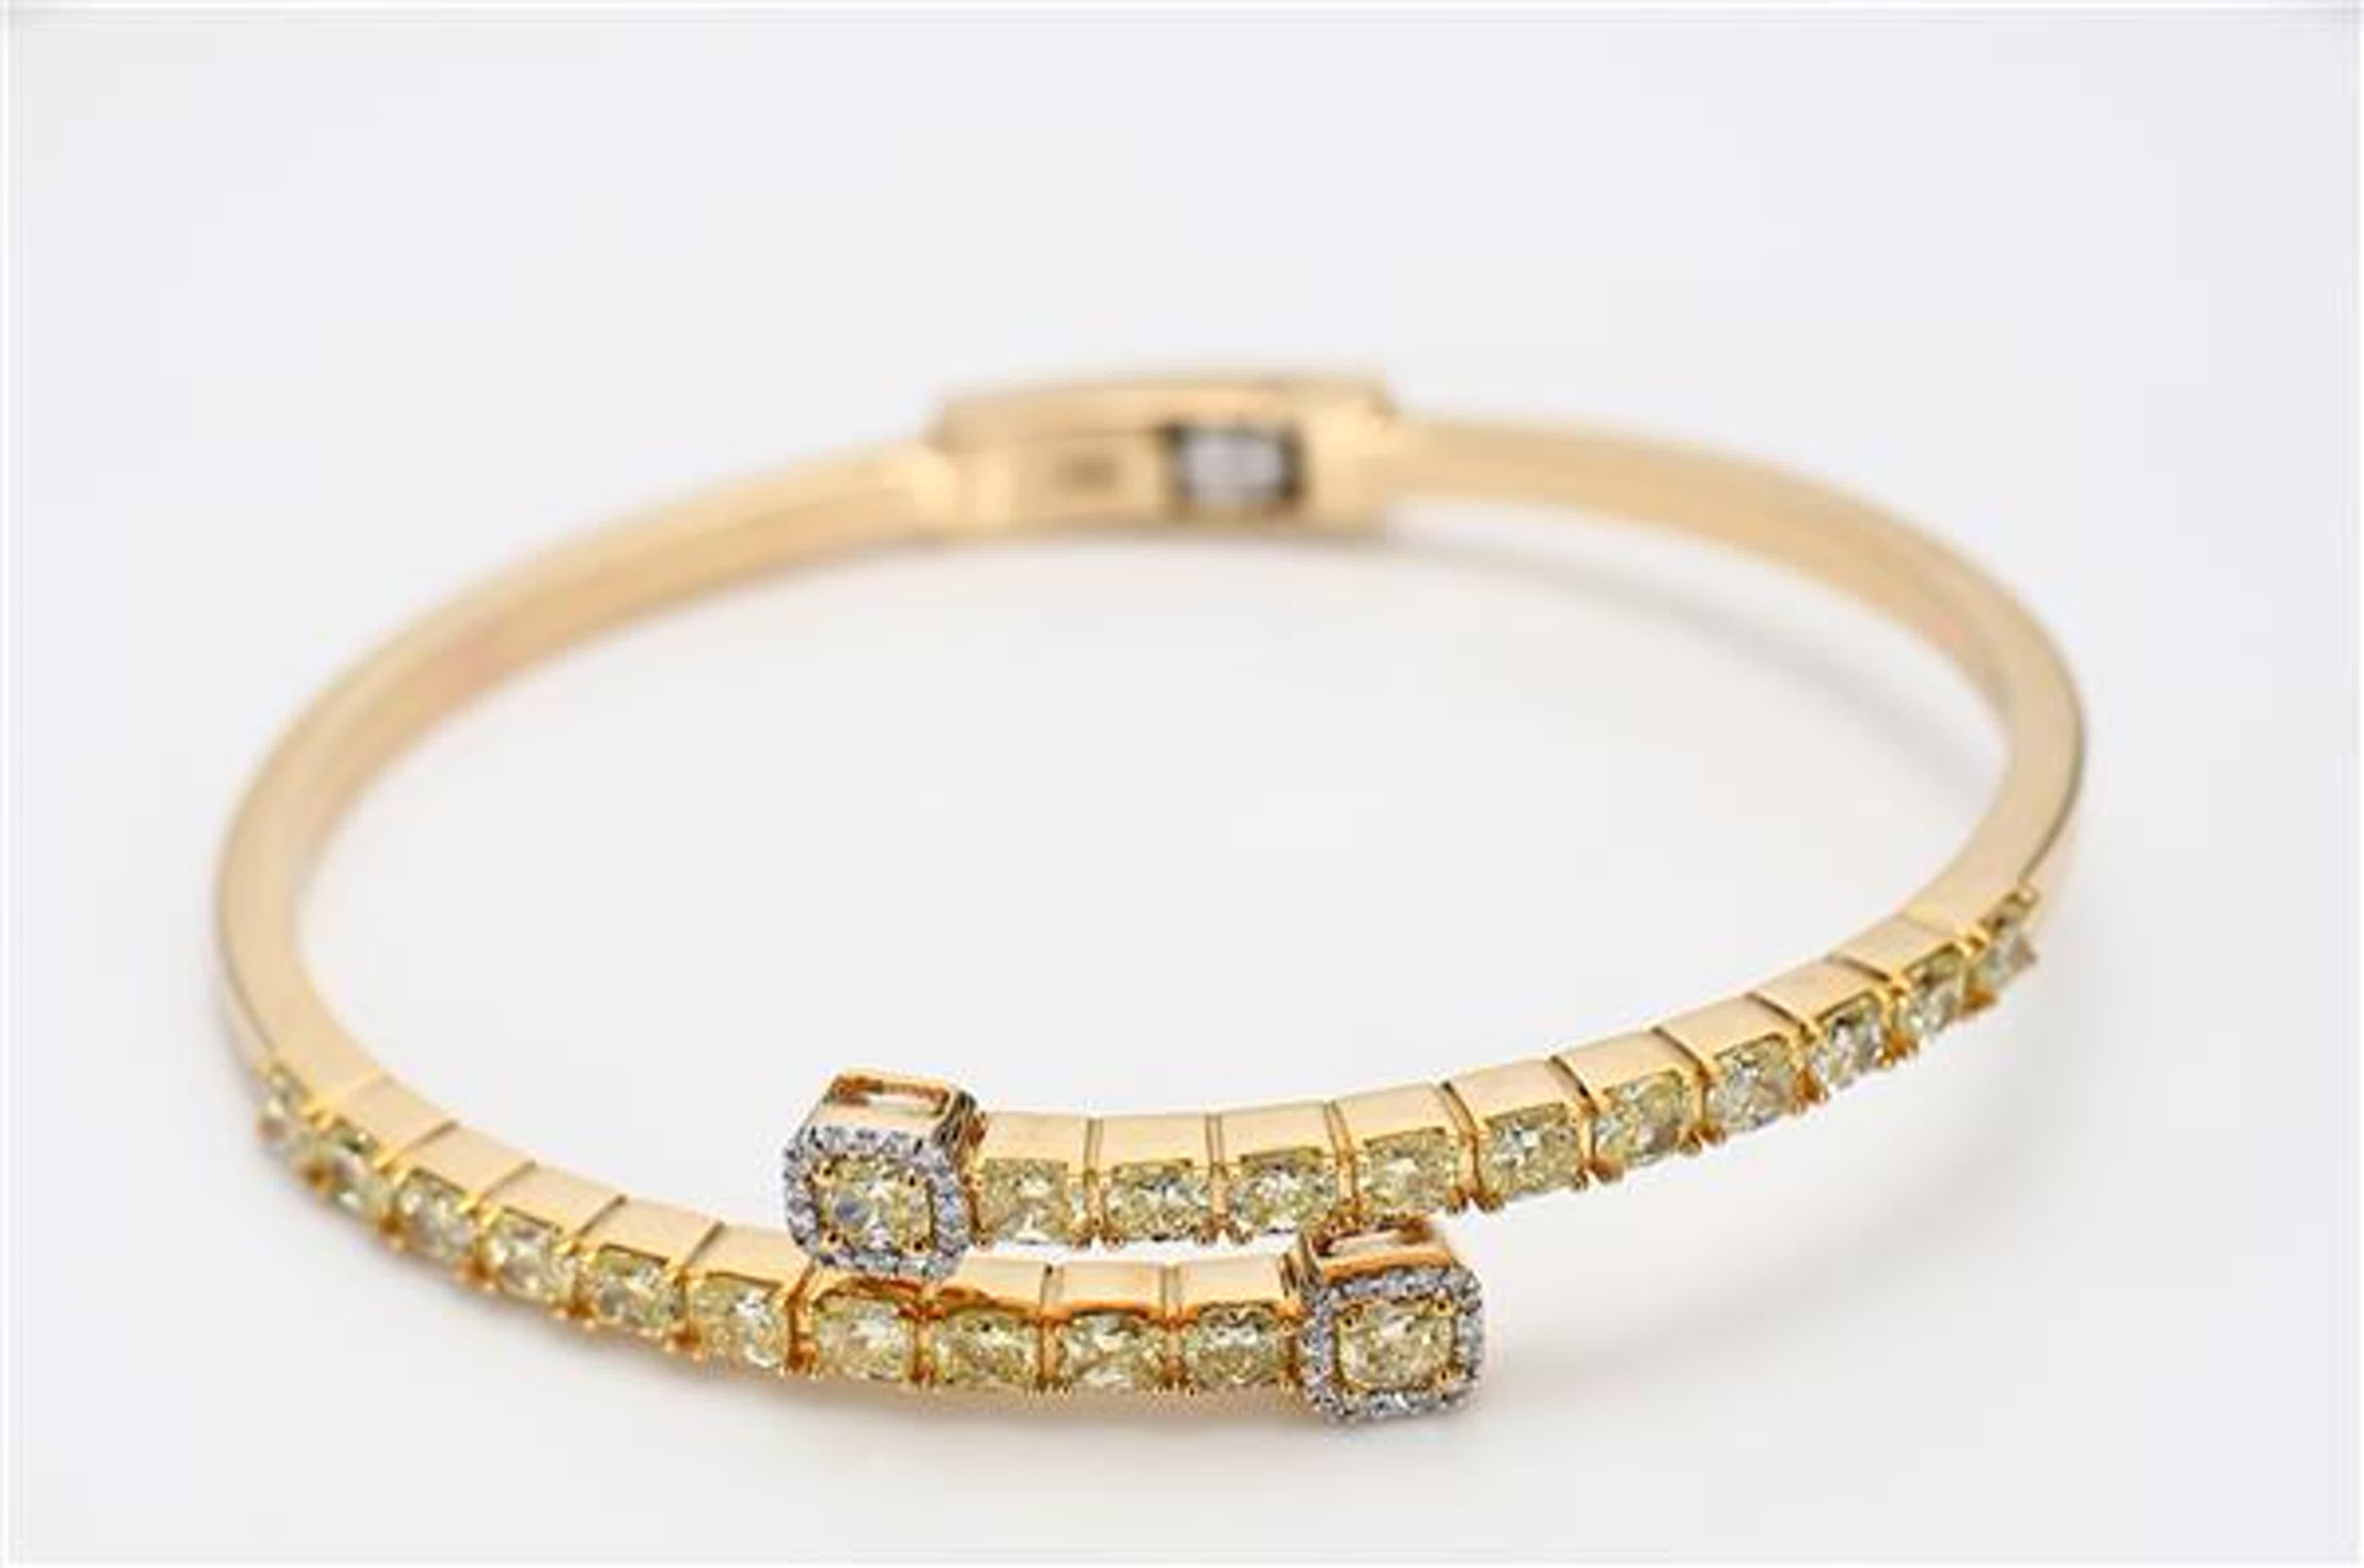 RareGemWorld's classic diamond bracelet. Mounted in a beautiful 18K Yellow Gold setting with natural cushion cut yellow diamonds. The yellow diamonds are surrounded by small round natural white diamond melee. This bracelet is guaranteed to impress!